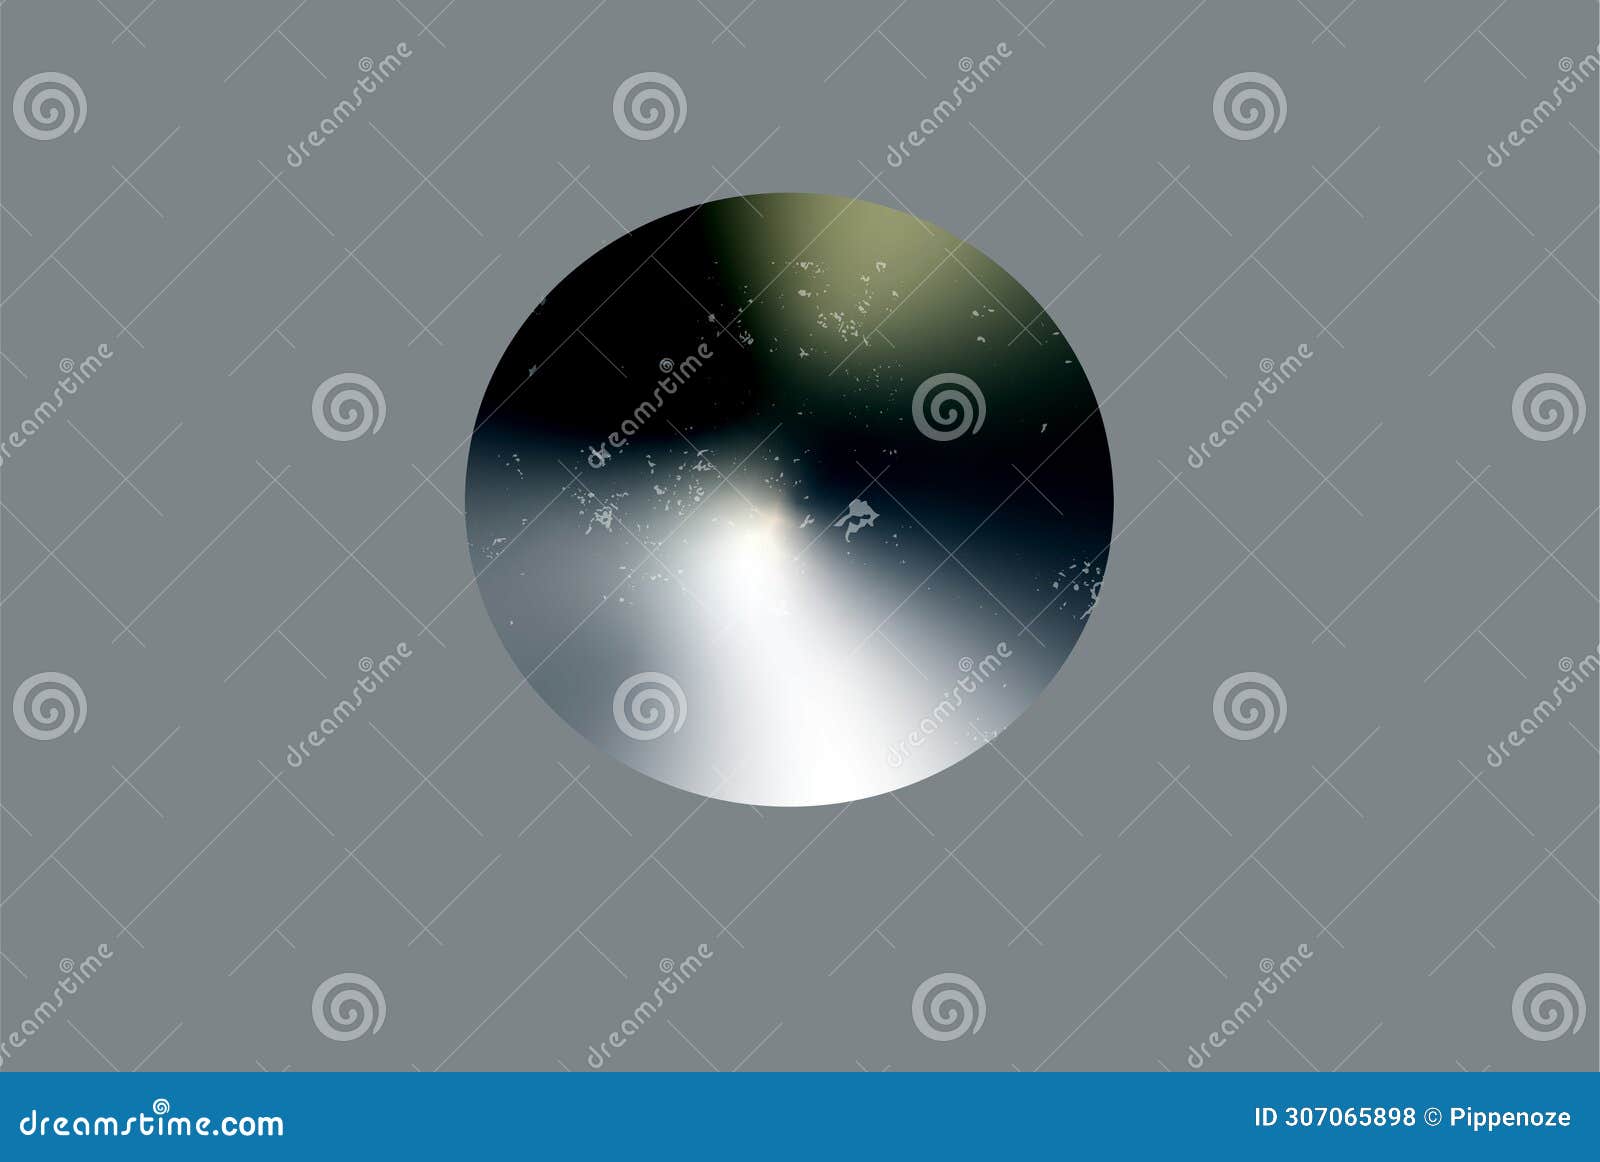 gray color metal textured circle with scratches.   for your graphic , banner, flyer